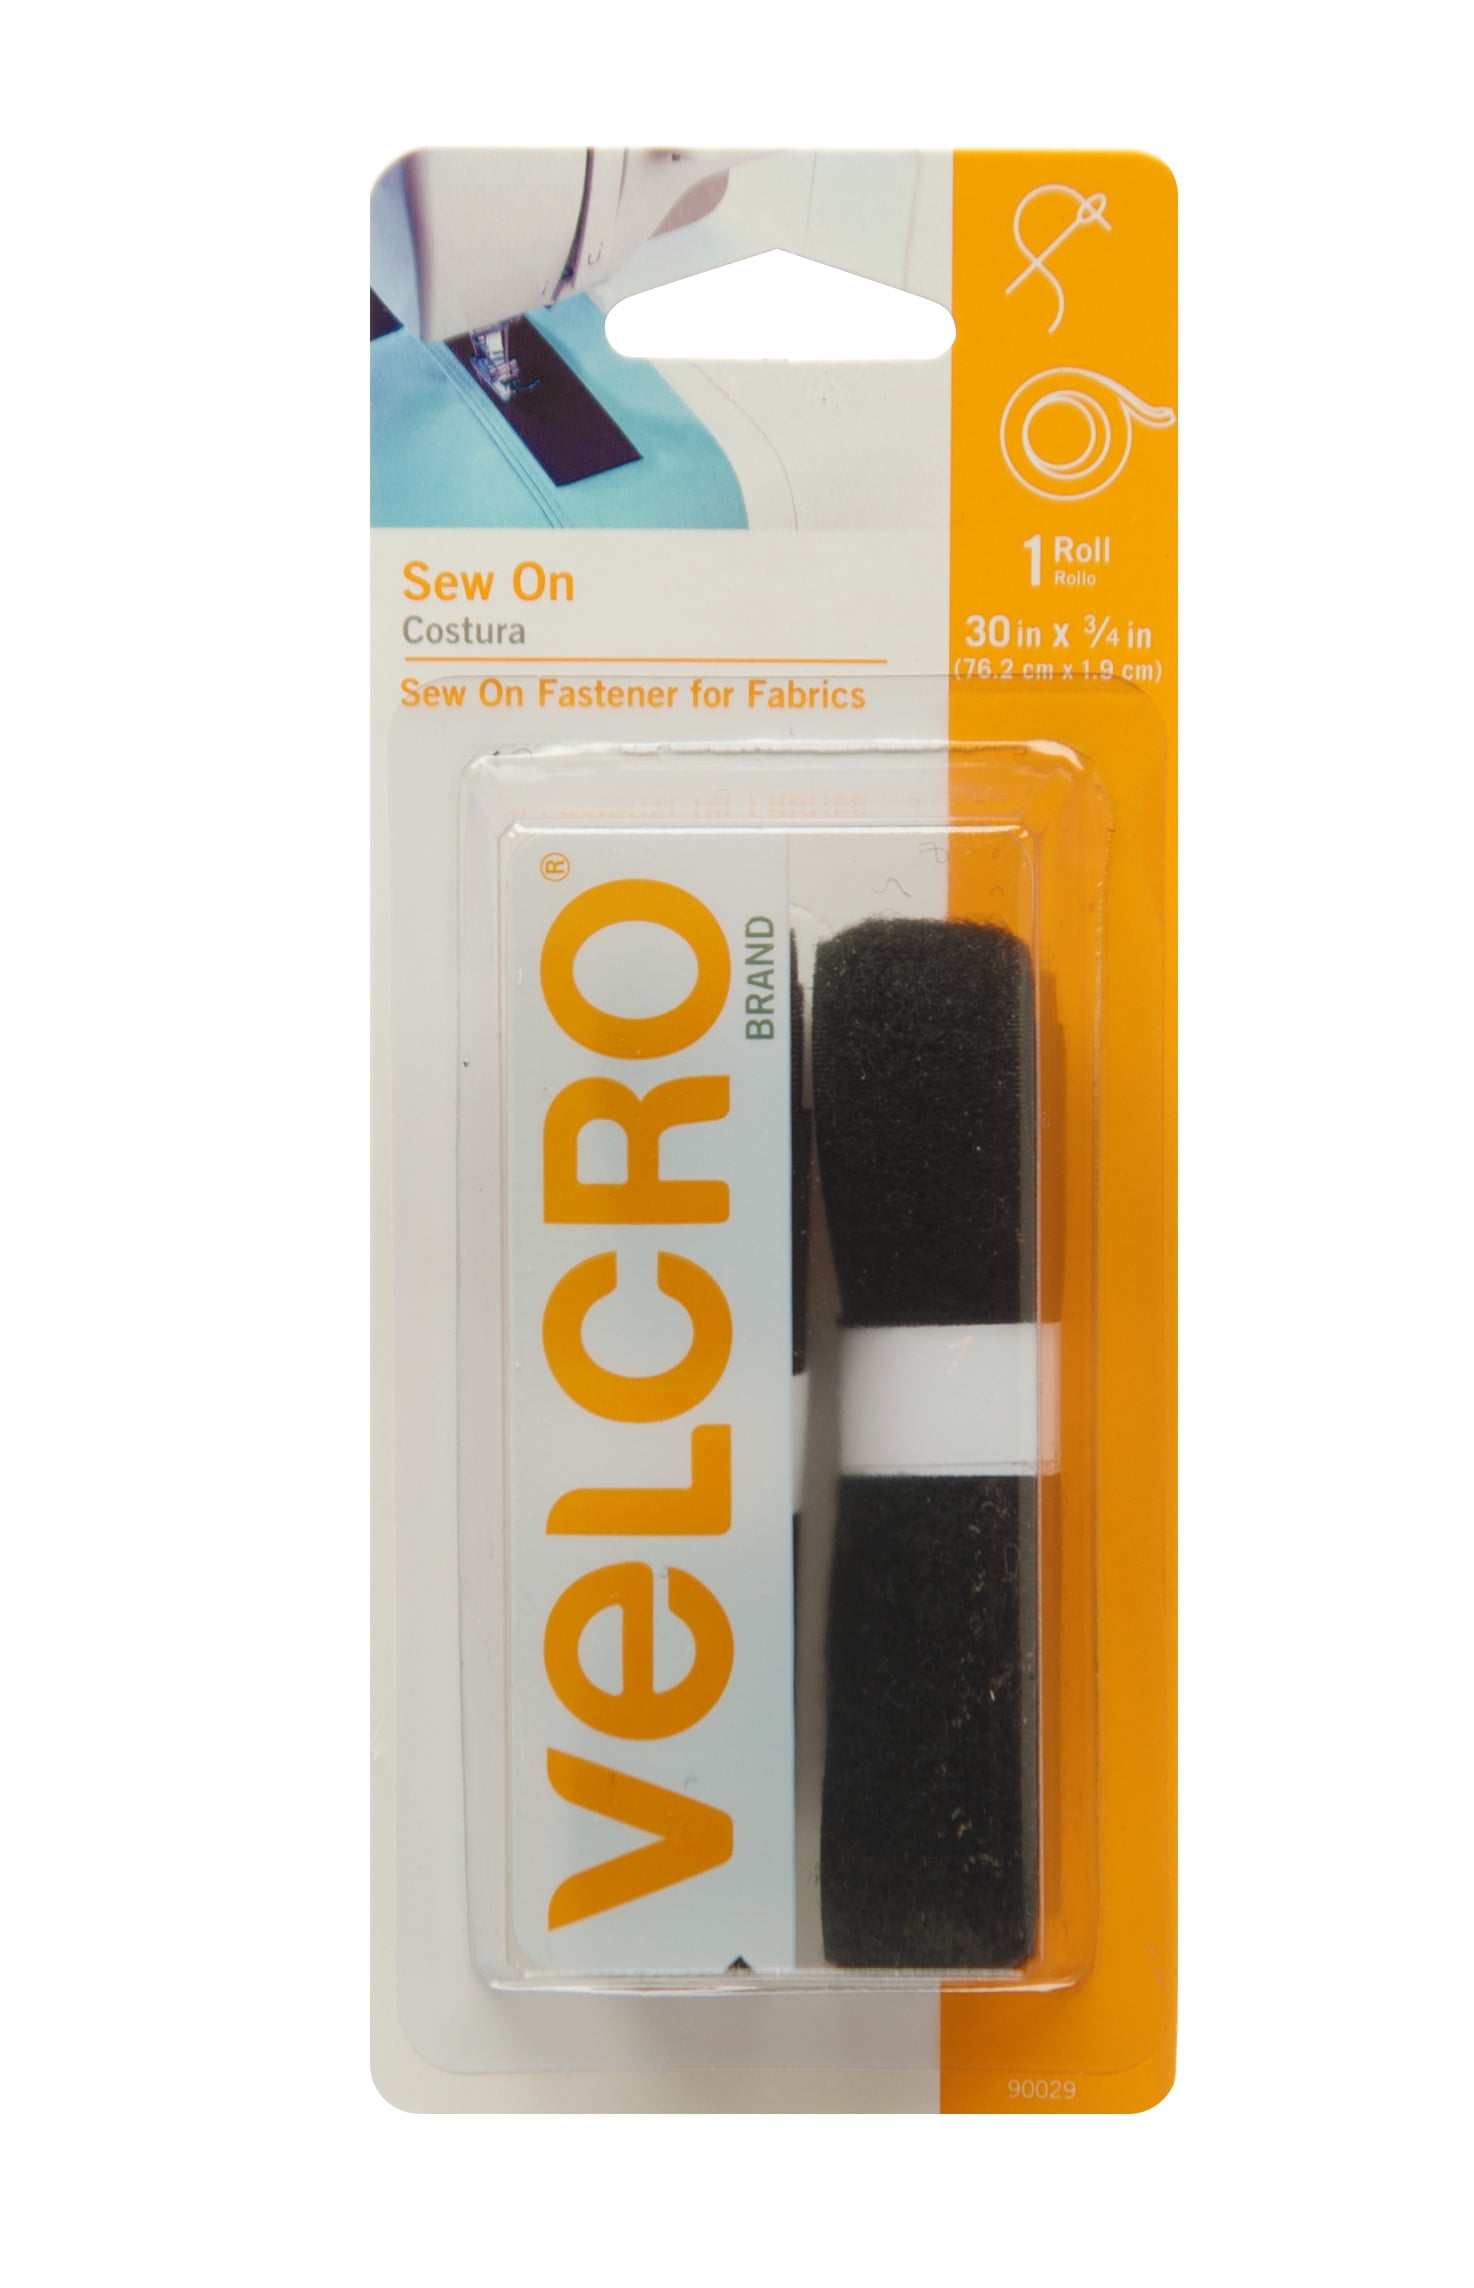 VELCRO Brand for Fabrics Sew on Fabric Tape, No Ironing 30in x 3/4in Roll  Black, 90029, 0.5 ounces 